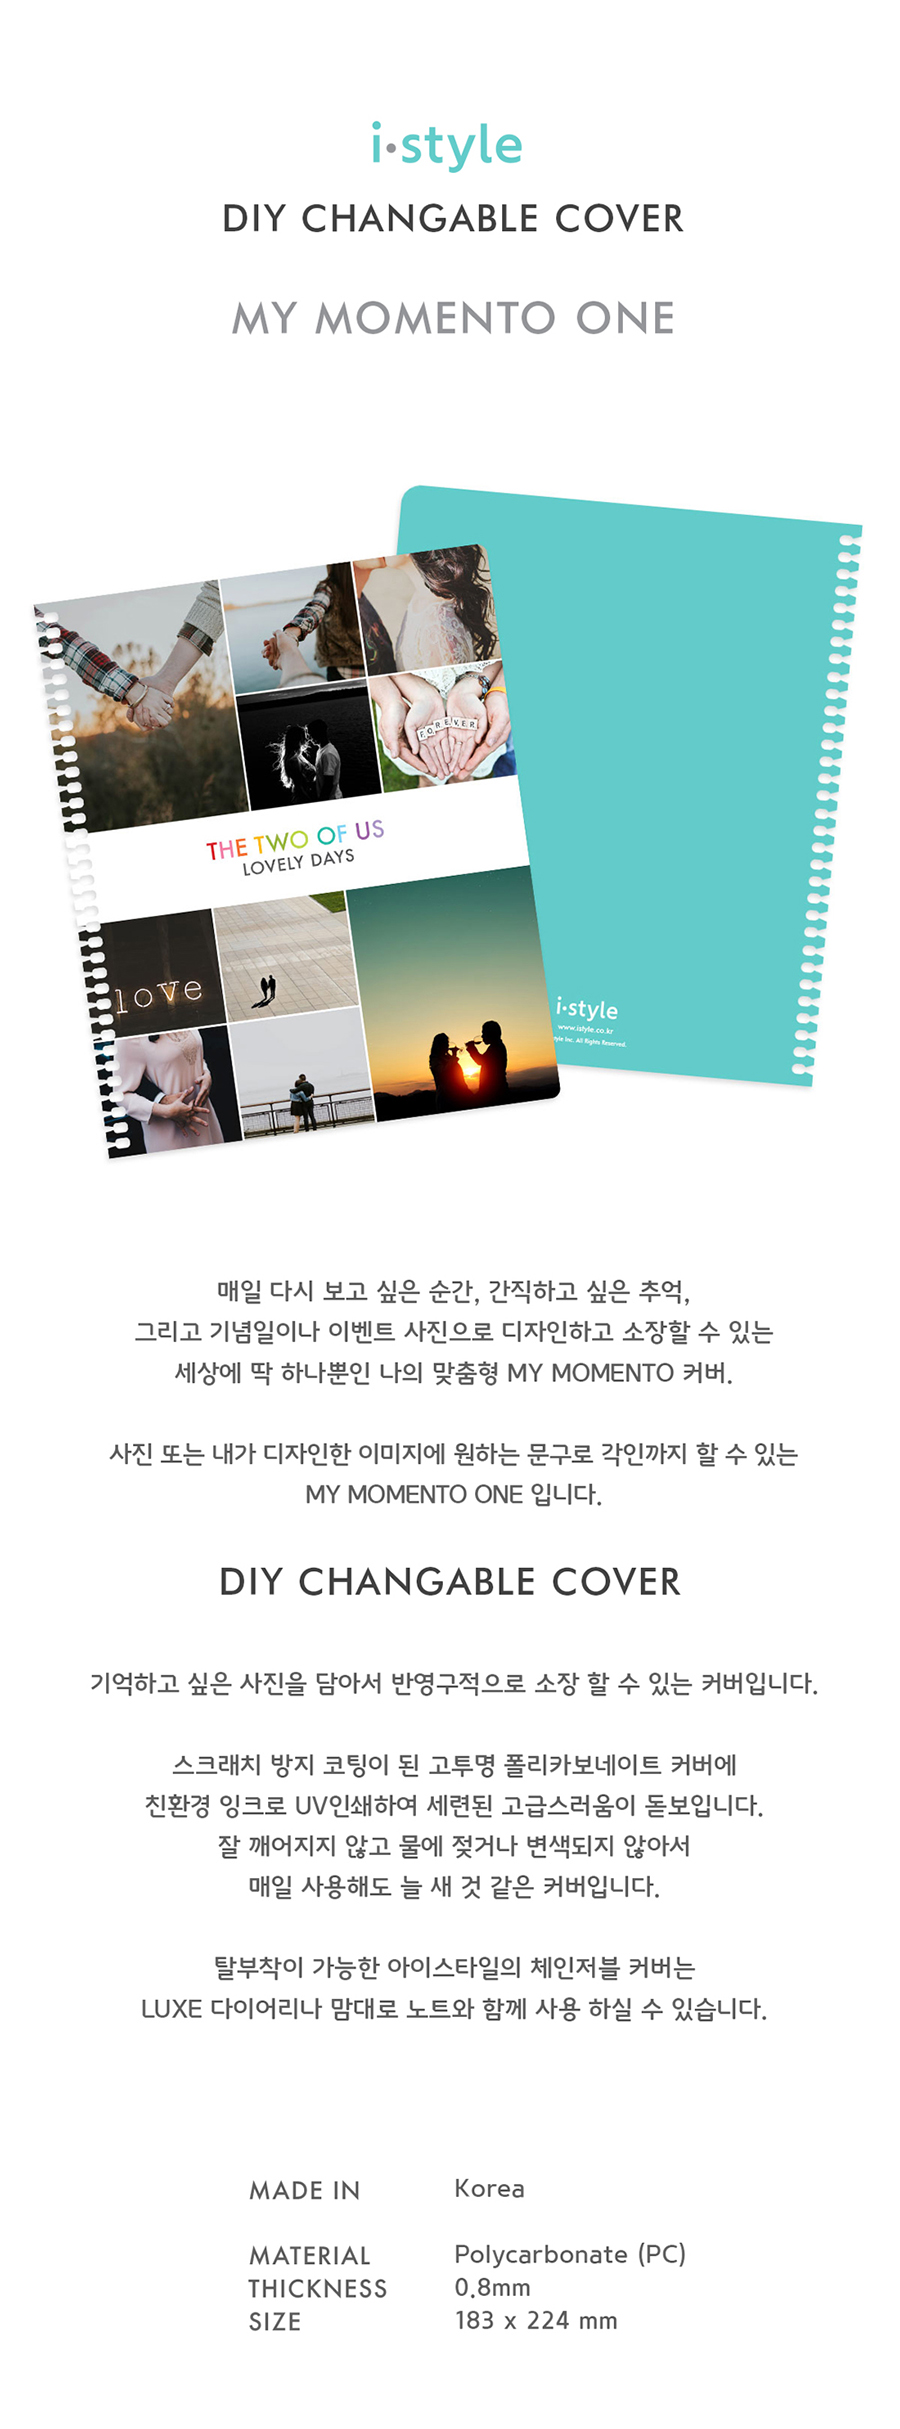 [MyMomento]ChangeableCoverOnlyDetails(One)V2_153906.jpg